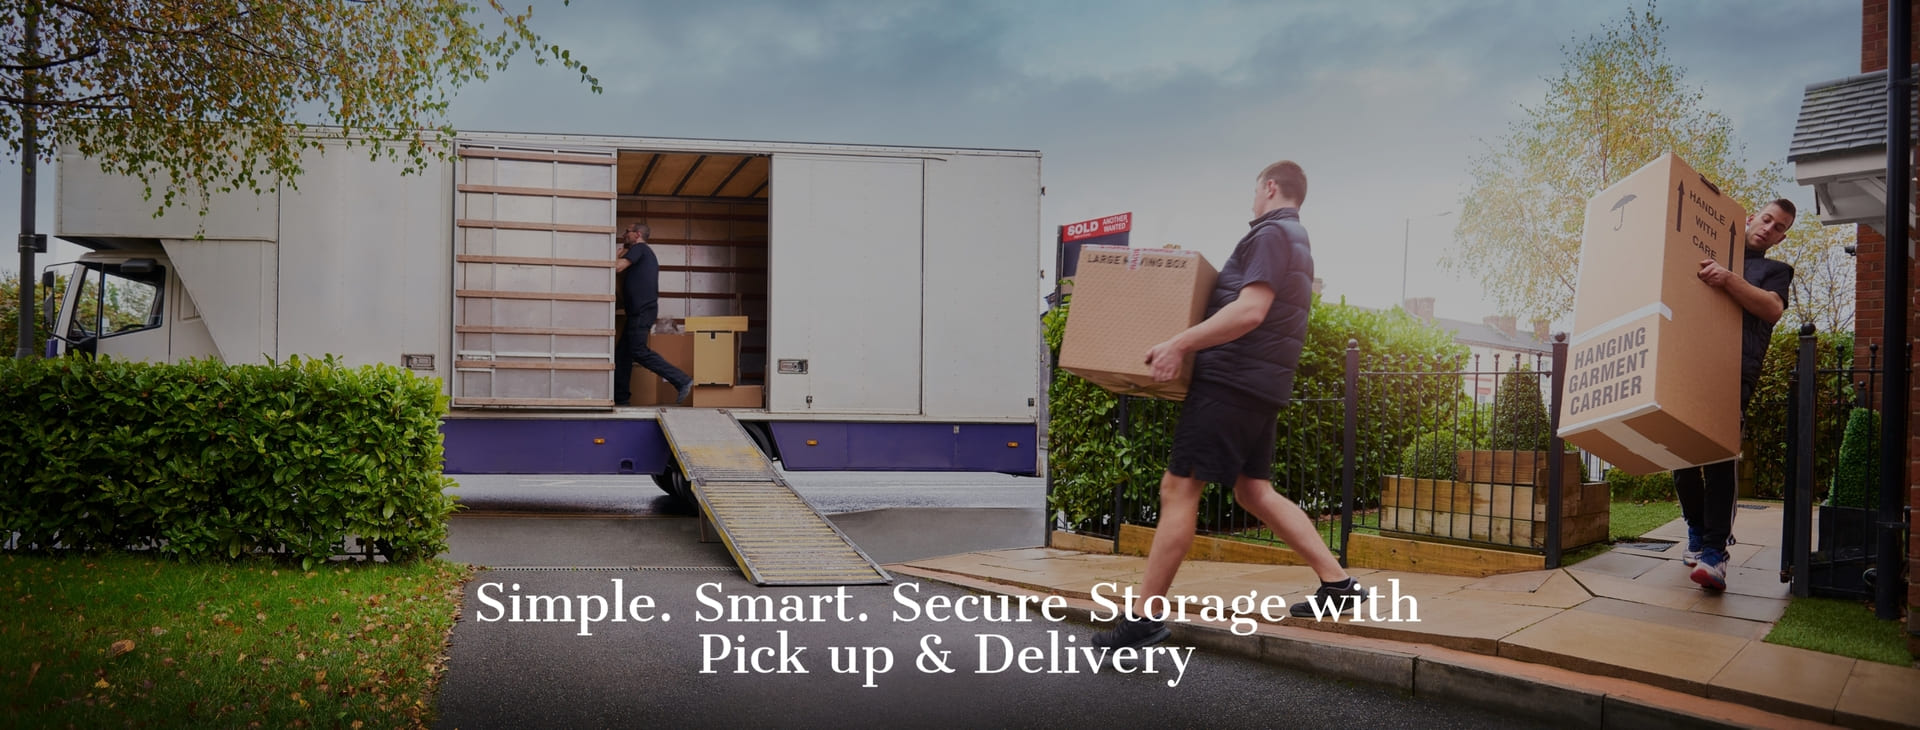 Storage Pick-up & Delivery